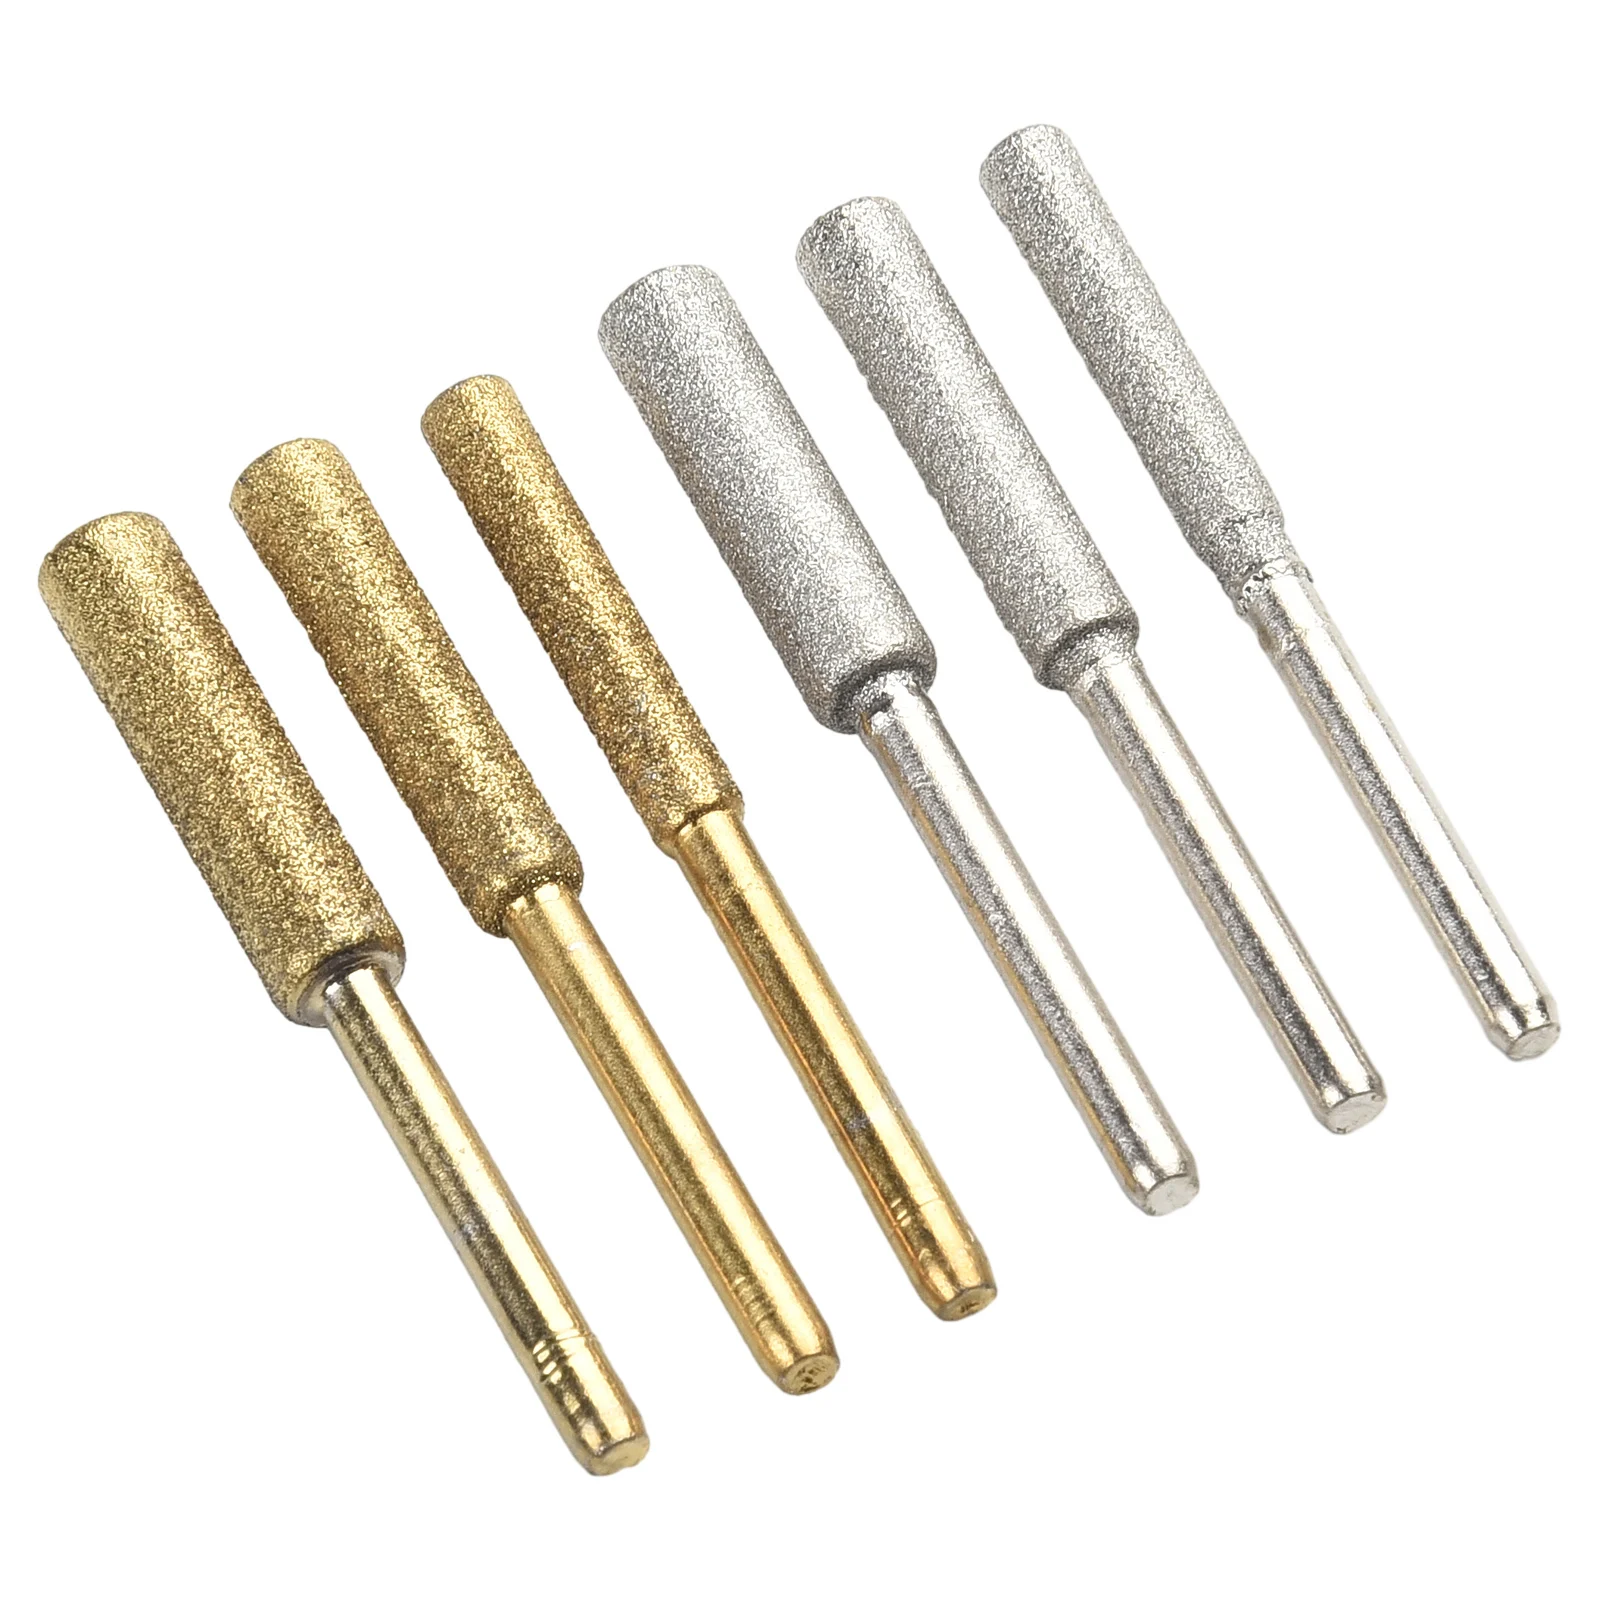 

Chainsaw Sharpener Metal Grinding 6PCS Carving Coated Diamond Grinding Tool Sharpener Stone File Power Tool Parts